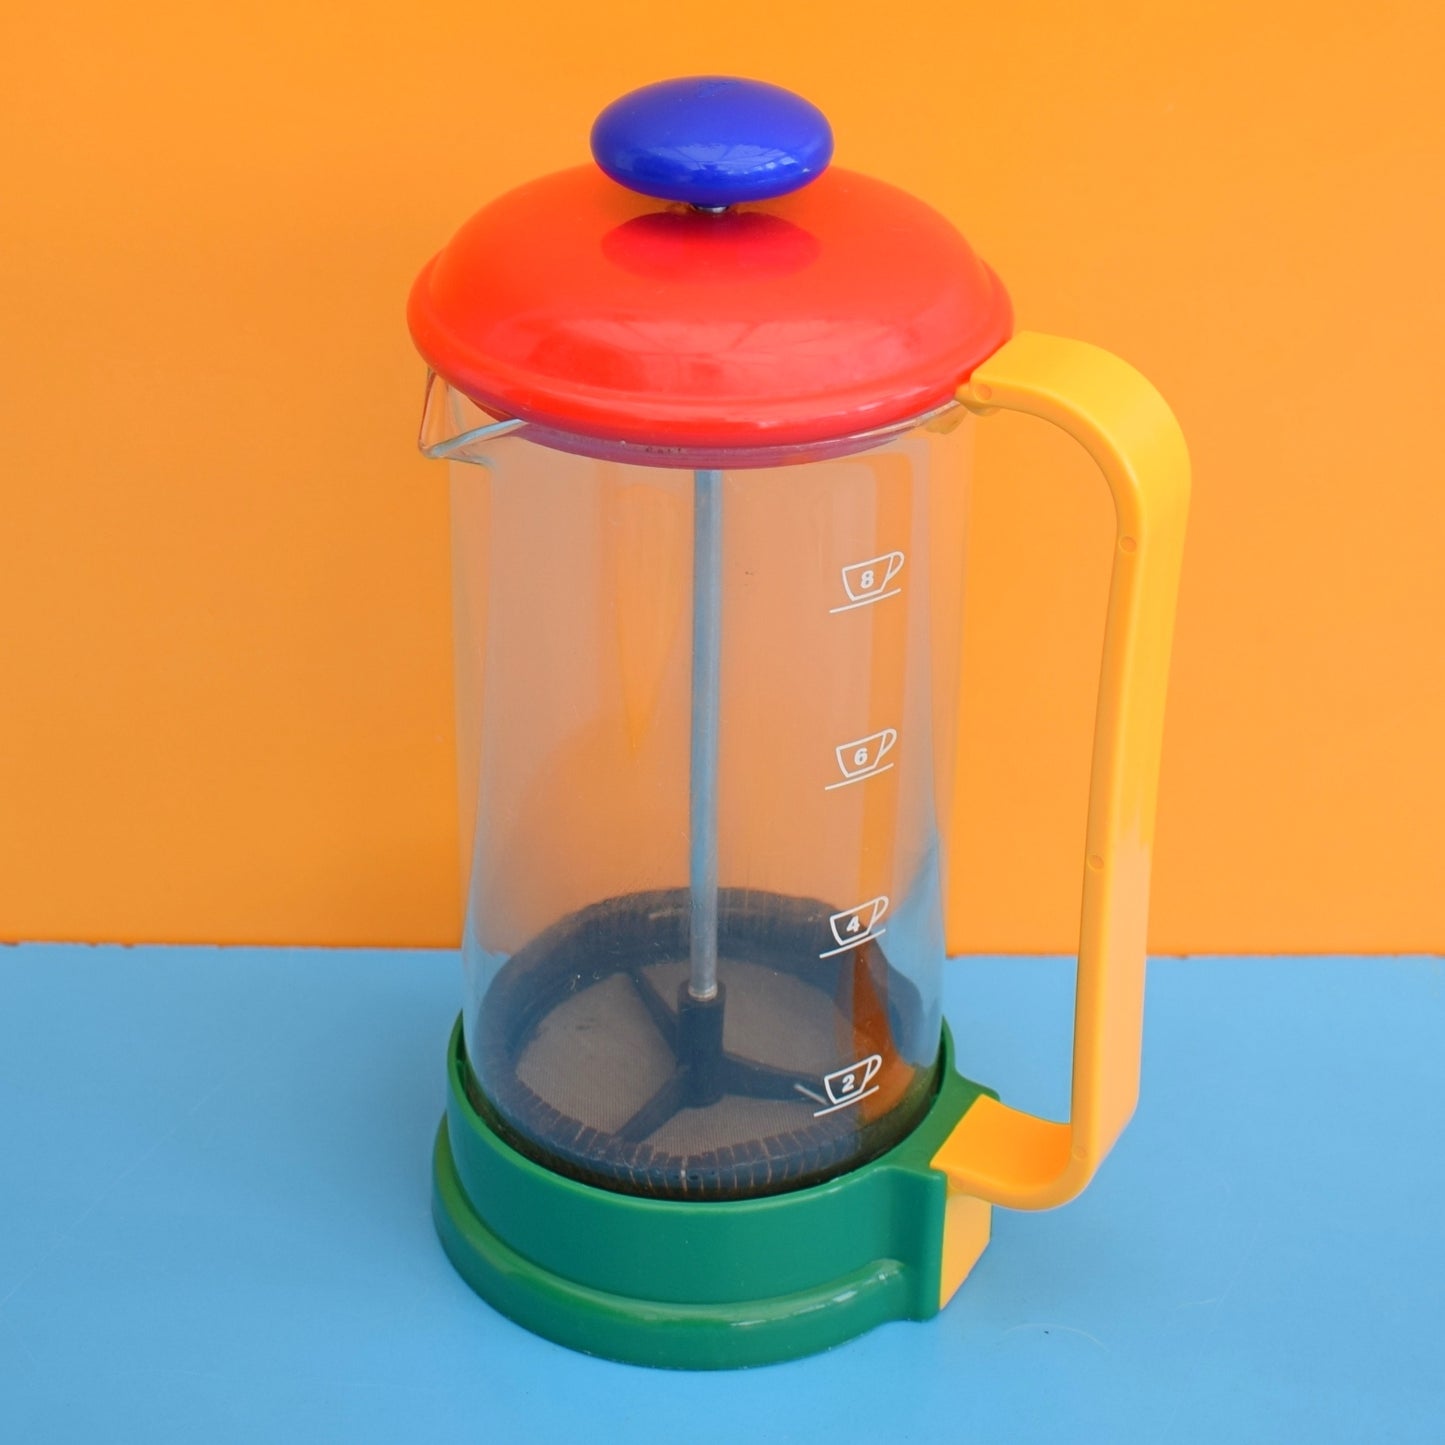 Vintage 1980s Coffee Maker - Cafetiere